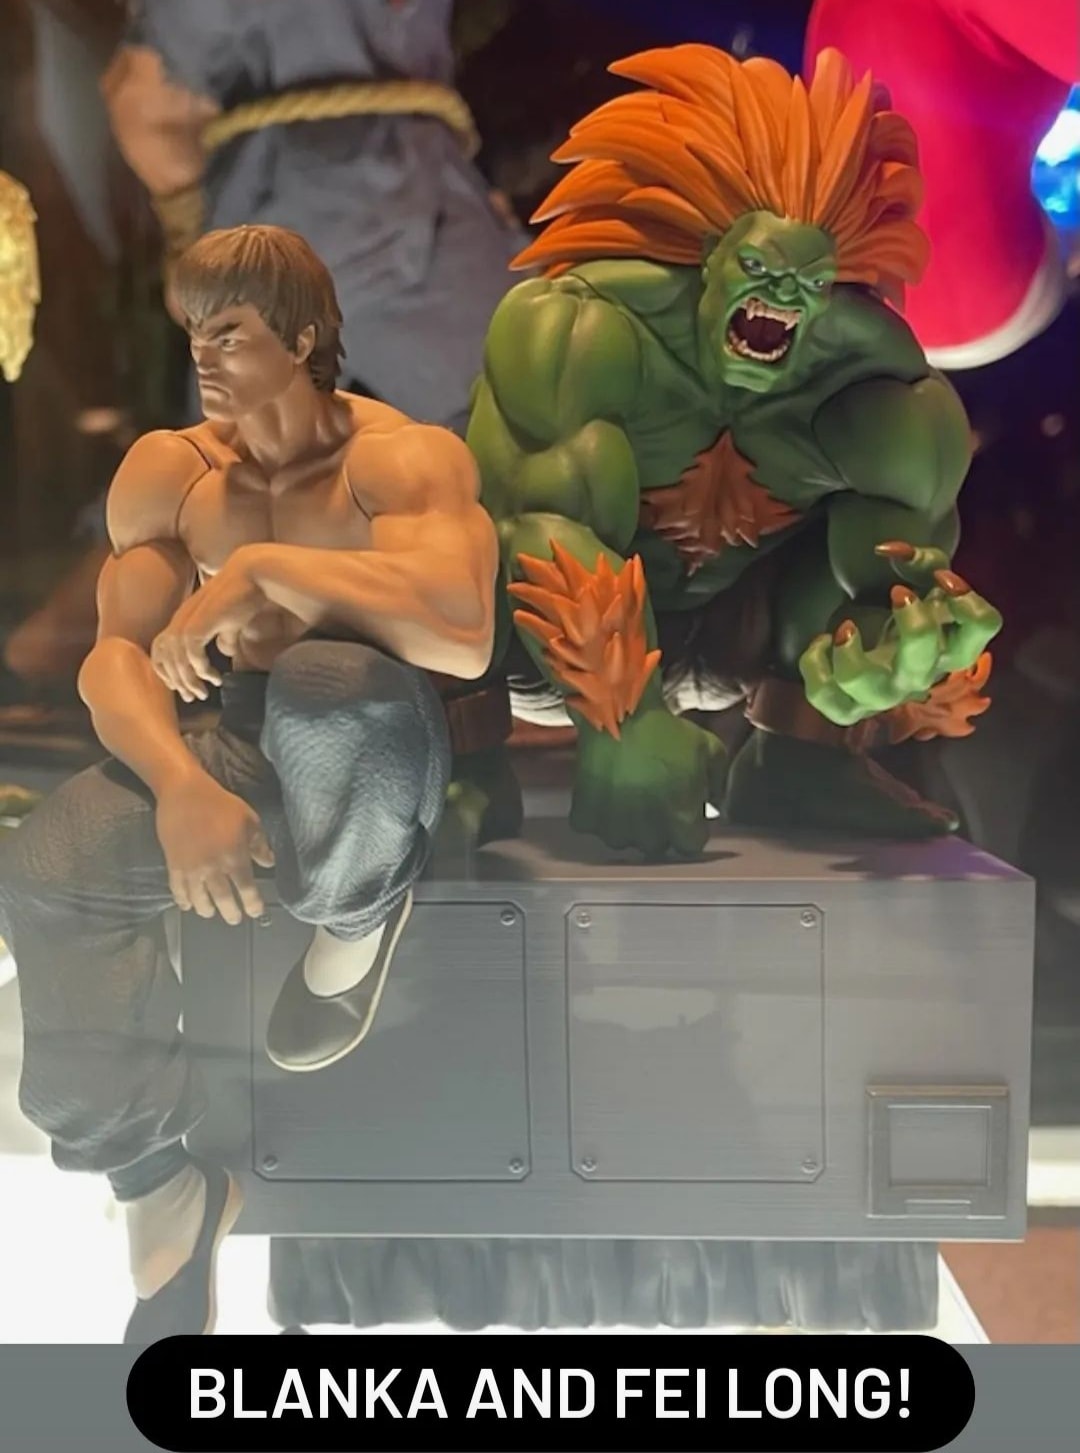 Street Fighter Ryu and Dan Street Jam 1:10 Collectible Set by PCS